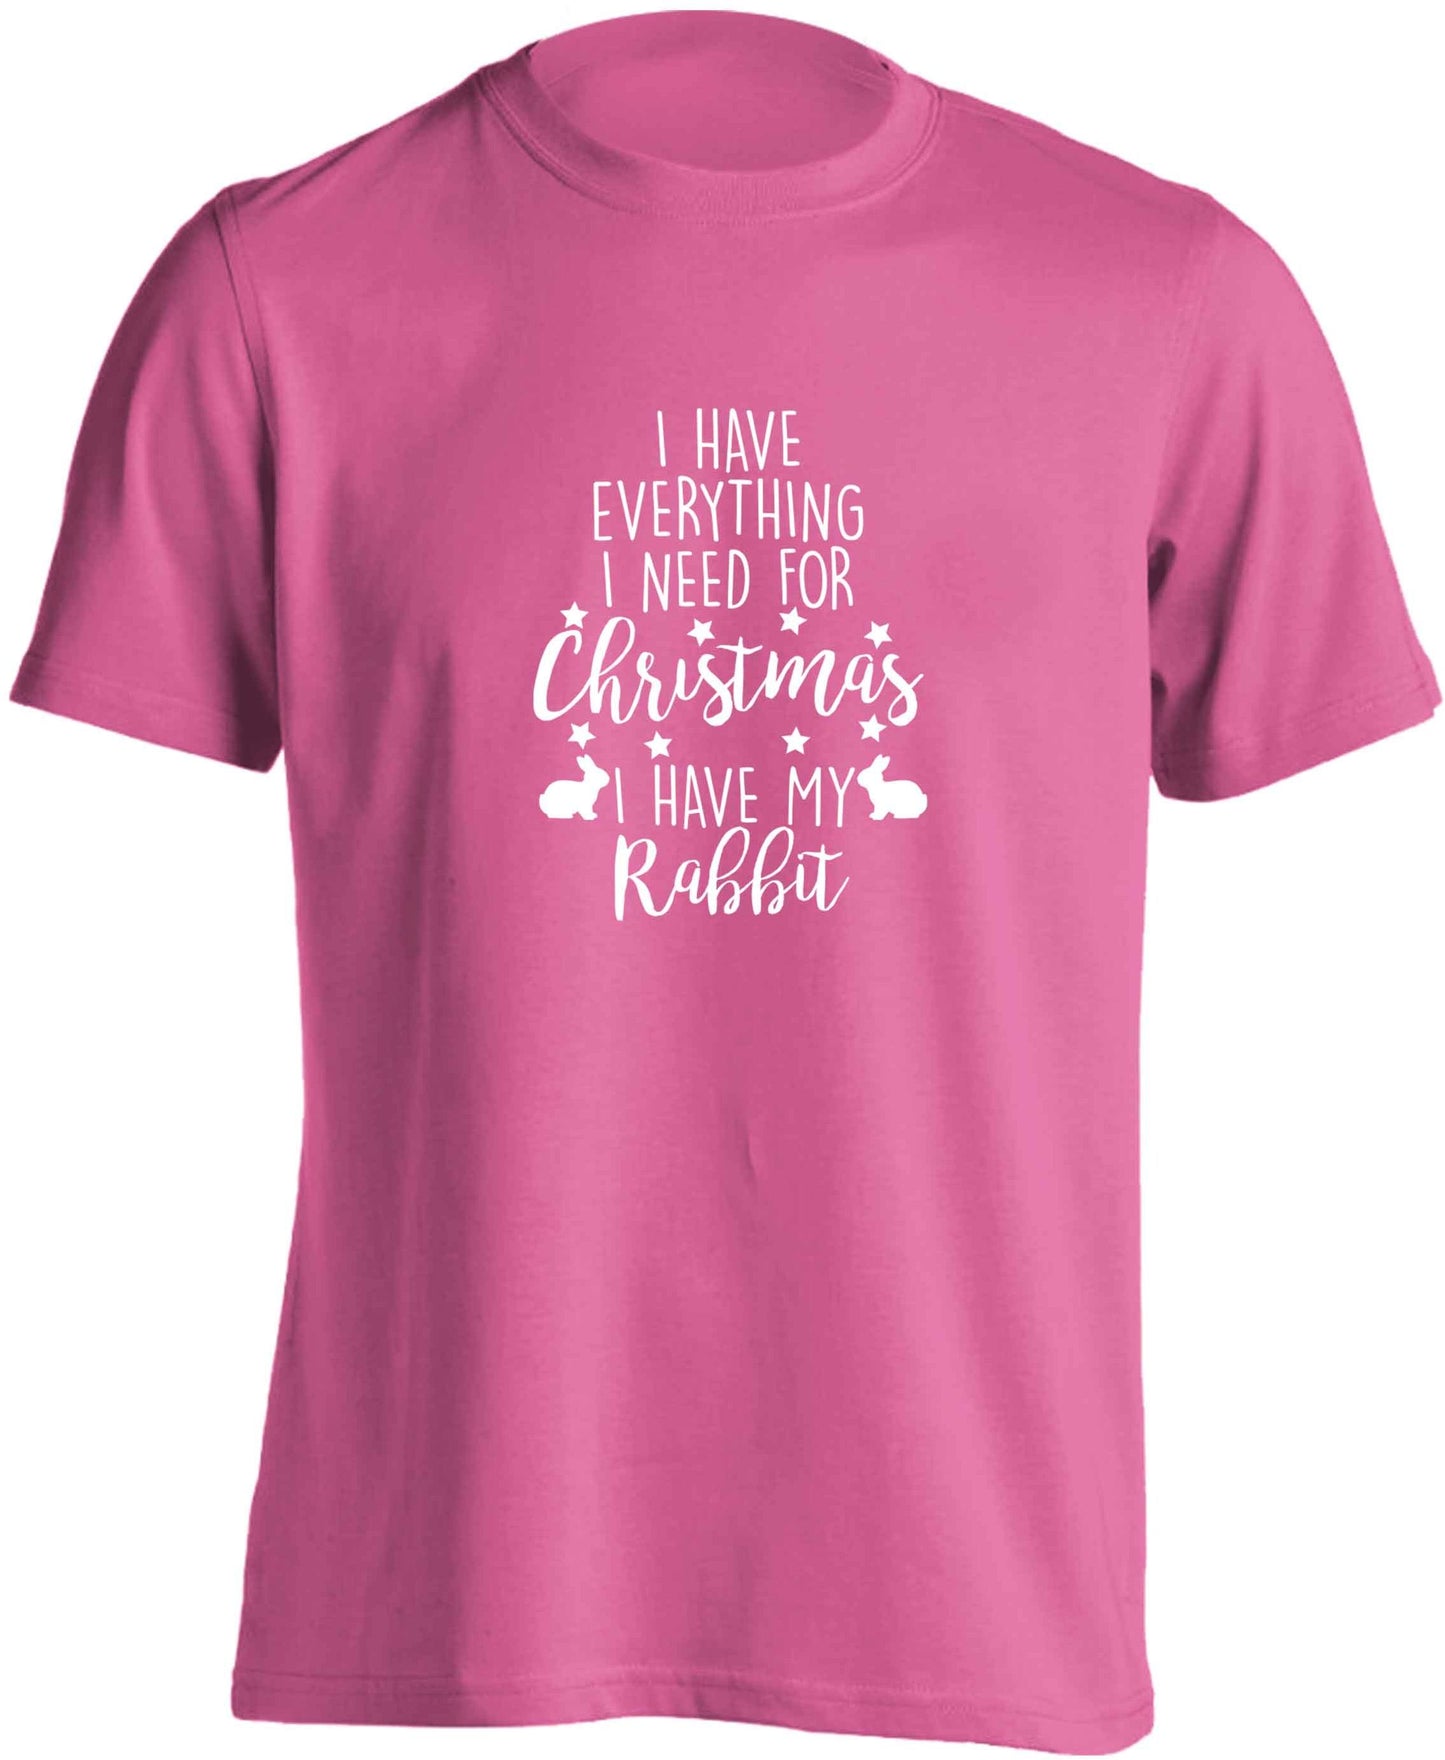 I have everything I need for Christmas I have my rabbit adults unisex pink Tshirt 2XL